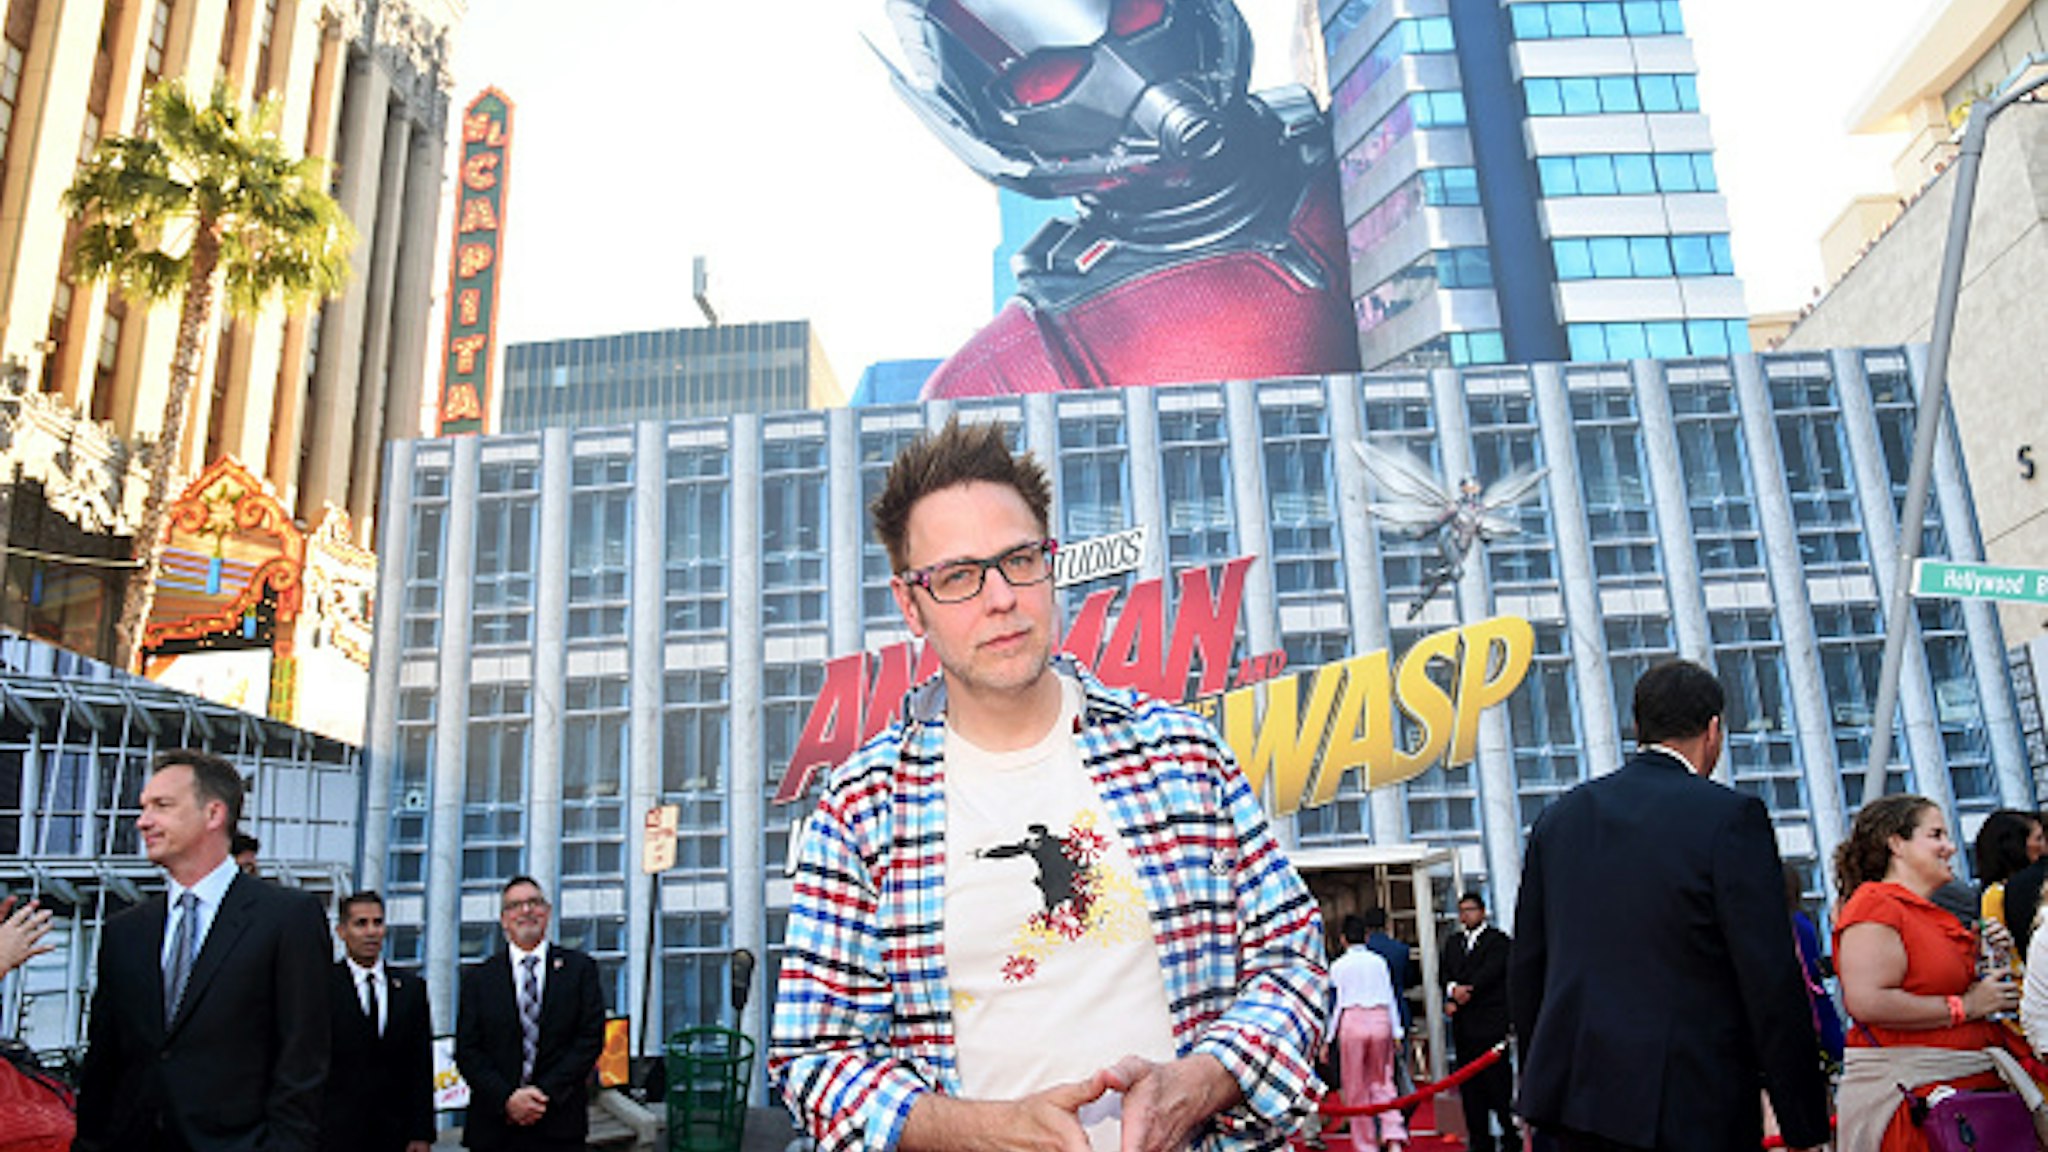 HOLLYWOOD, CA - JUNE 25: James Gunn attends the Los Angeles Global Premiere for Marvel Studios' "Ant-Man And The Wasp" at the El Capitan Theatre on June 25, 2018 in Hollywood, California.